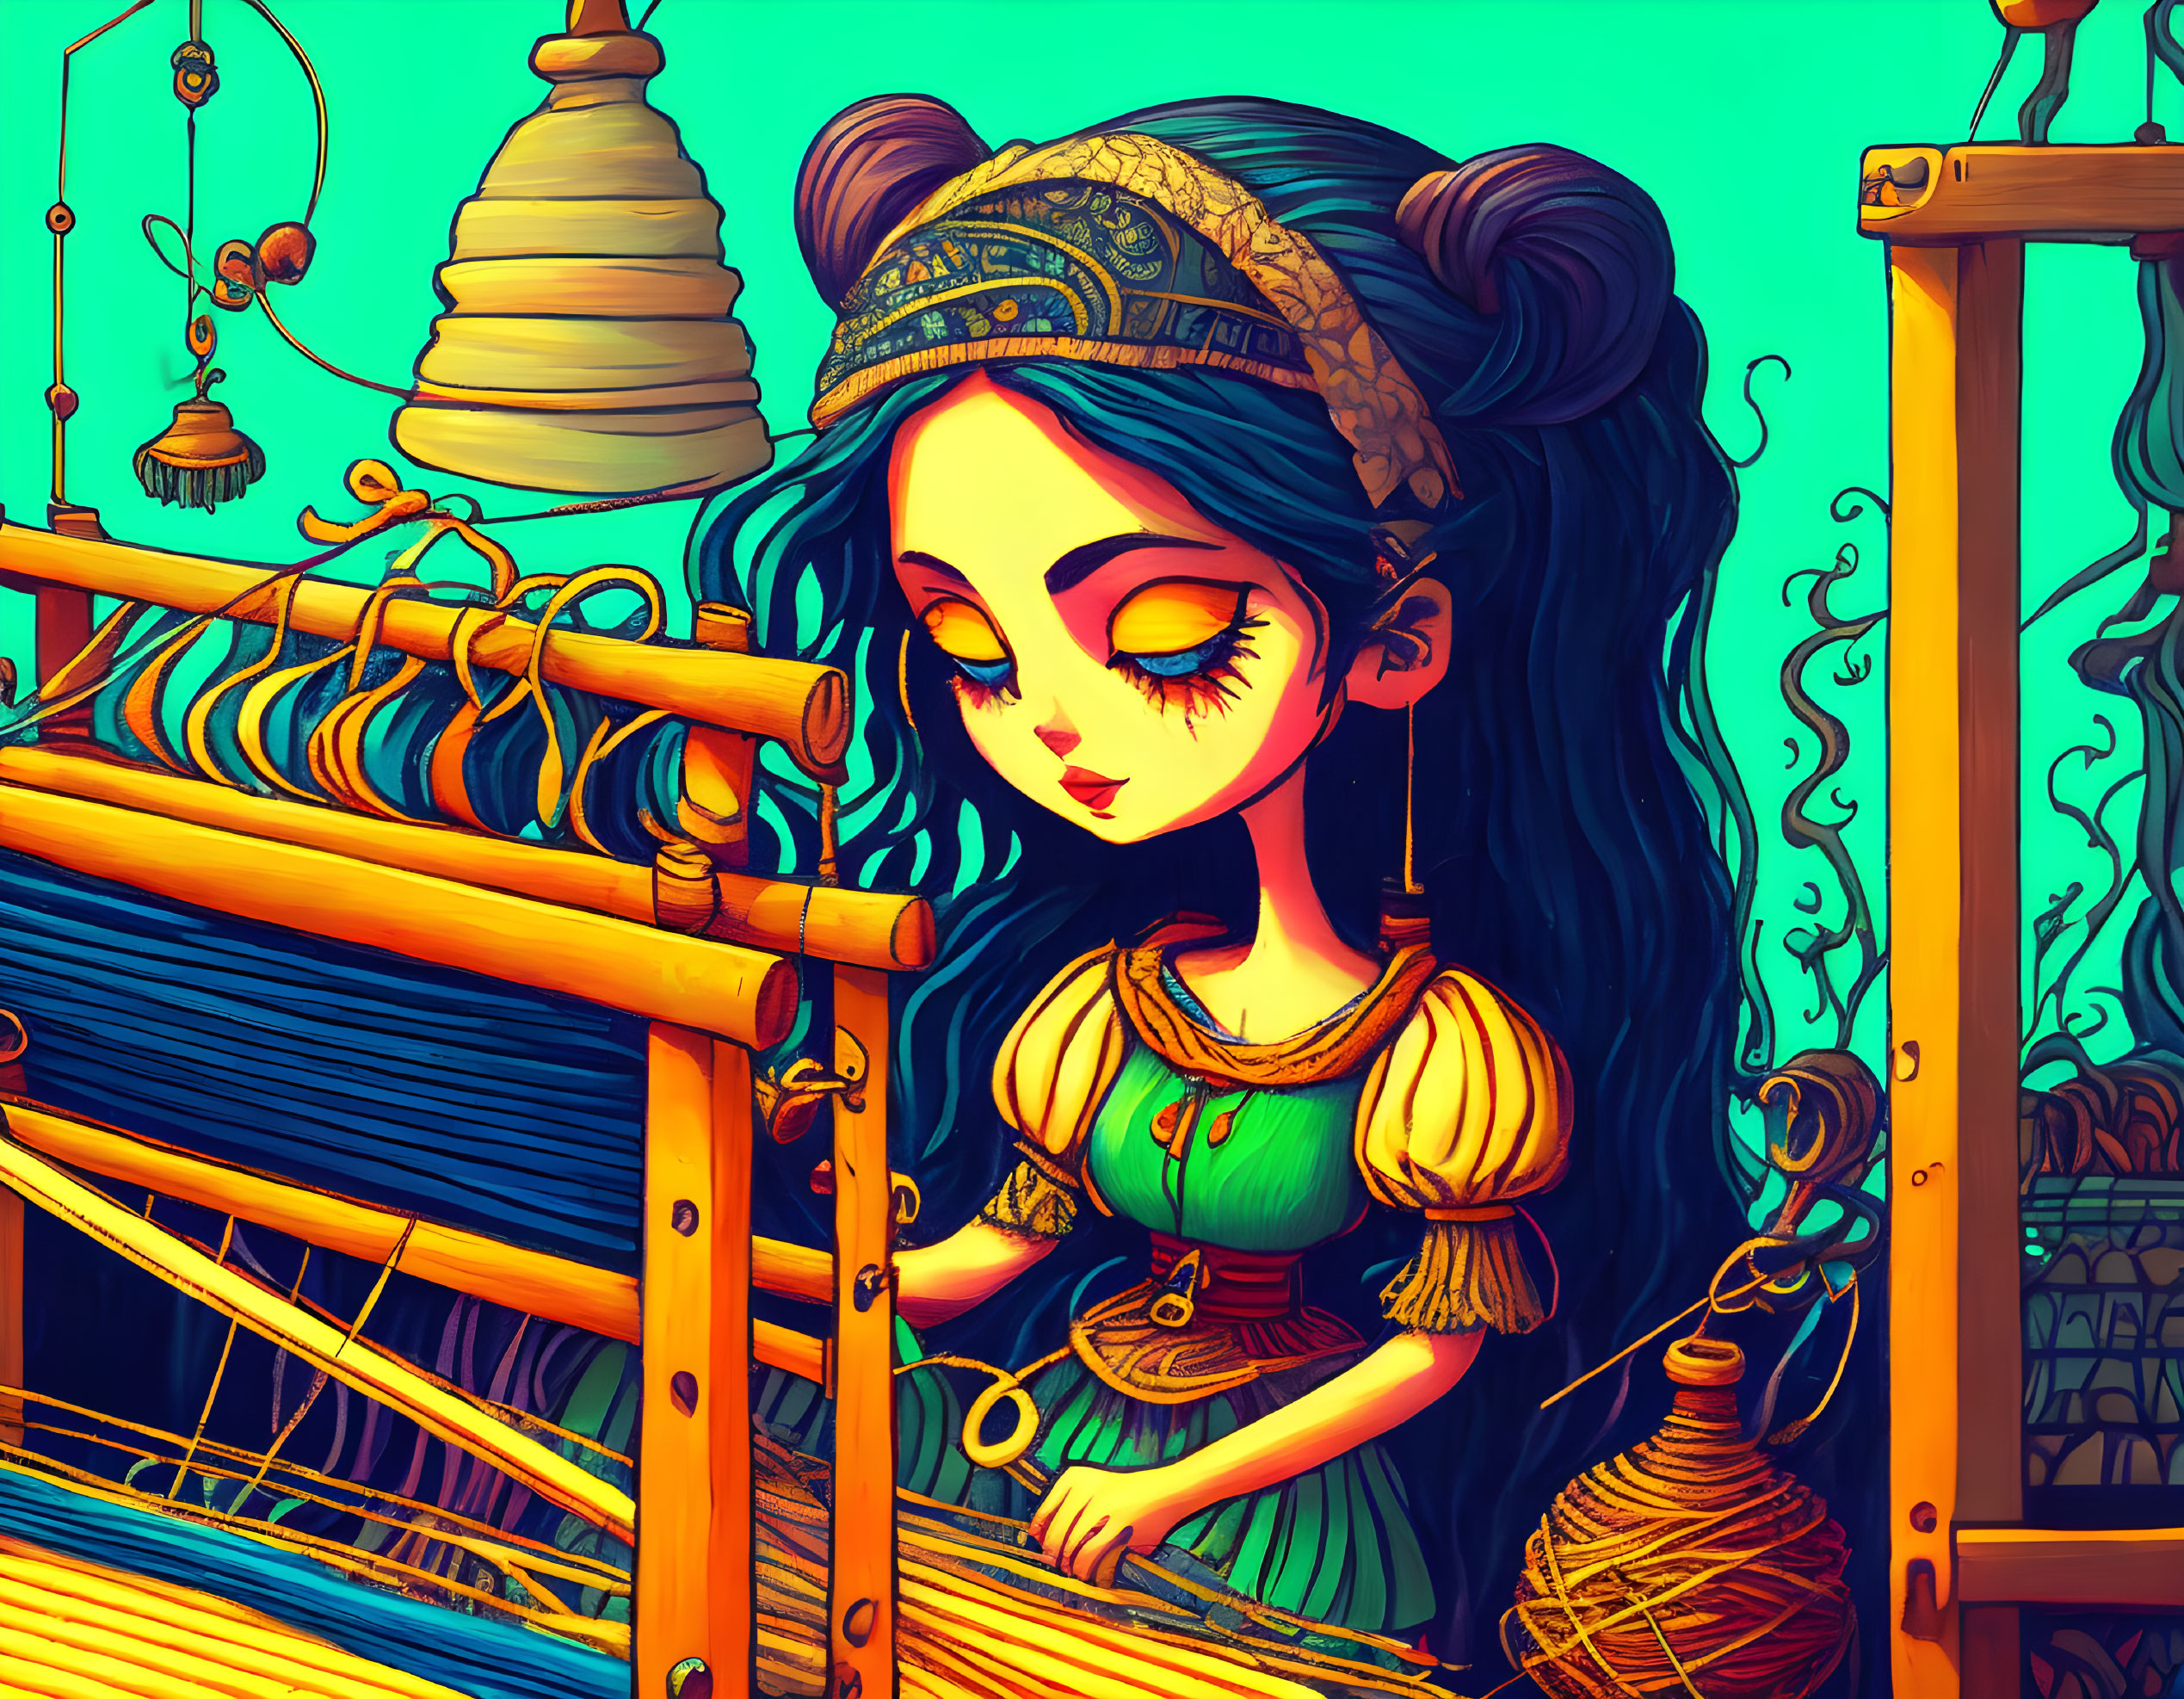 Detailed illustration of girl with dark hair weaving on colorful loom